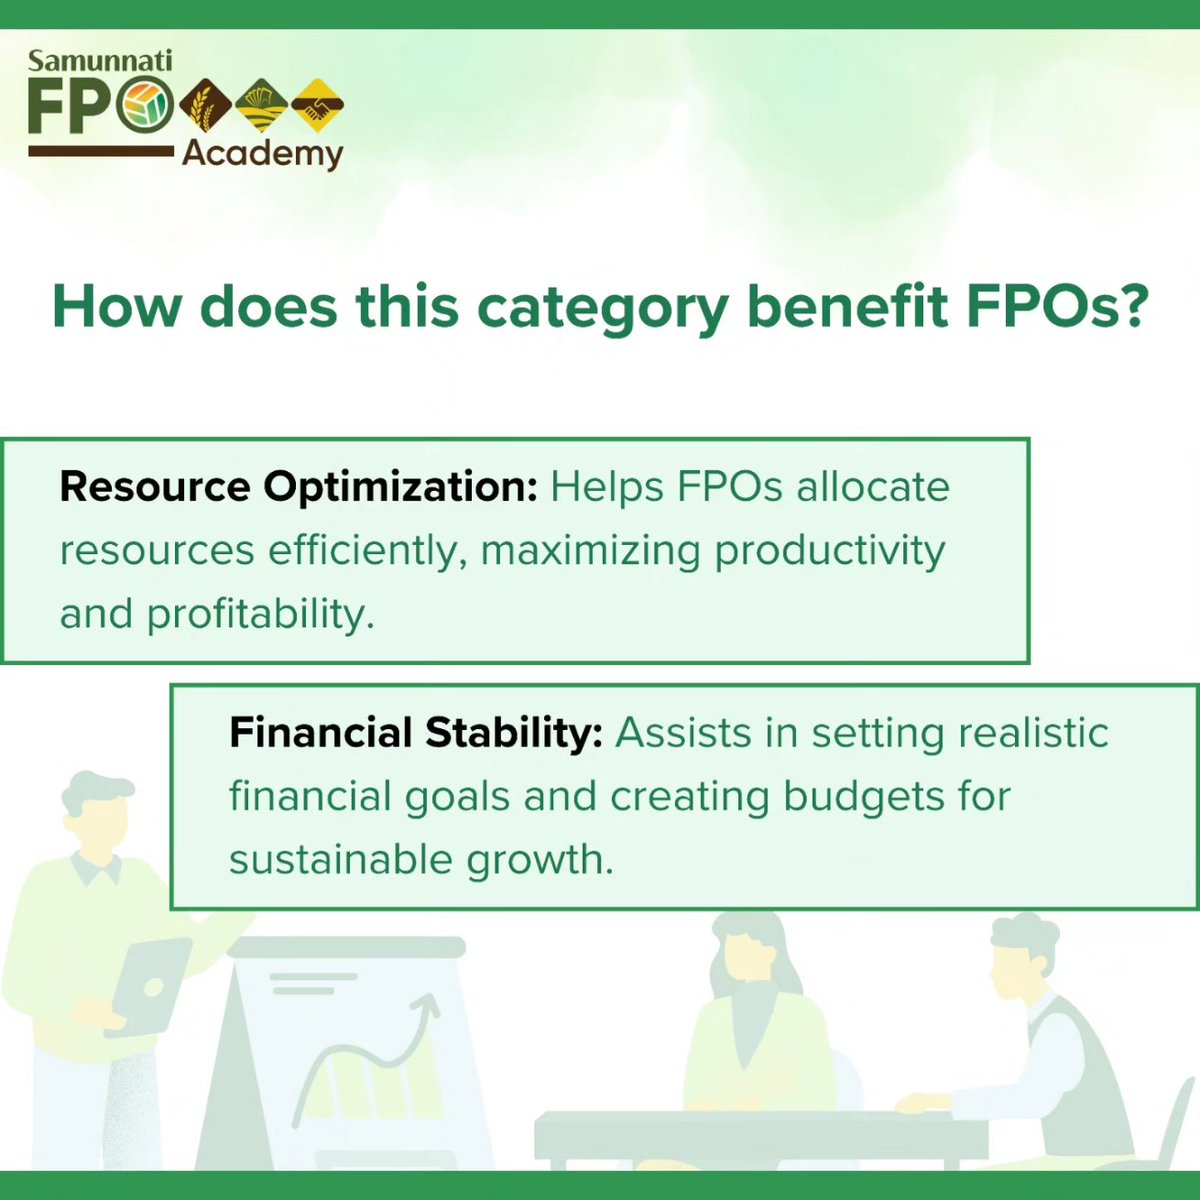 Welcome to Category 4: #BusinessPlanning. This category equips FPOs to create effective business plans, define vision, conduct market analysis, optimize resources, and manage finances. Let's drive your FPO towards sustainable growth and success.
#Samunnati #fpoacademy